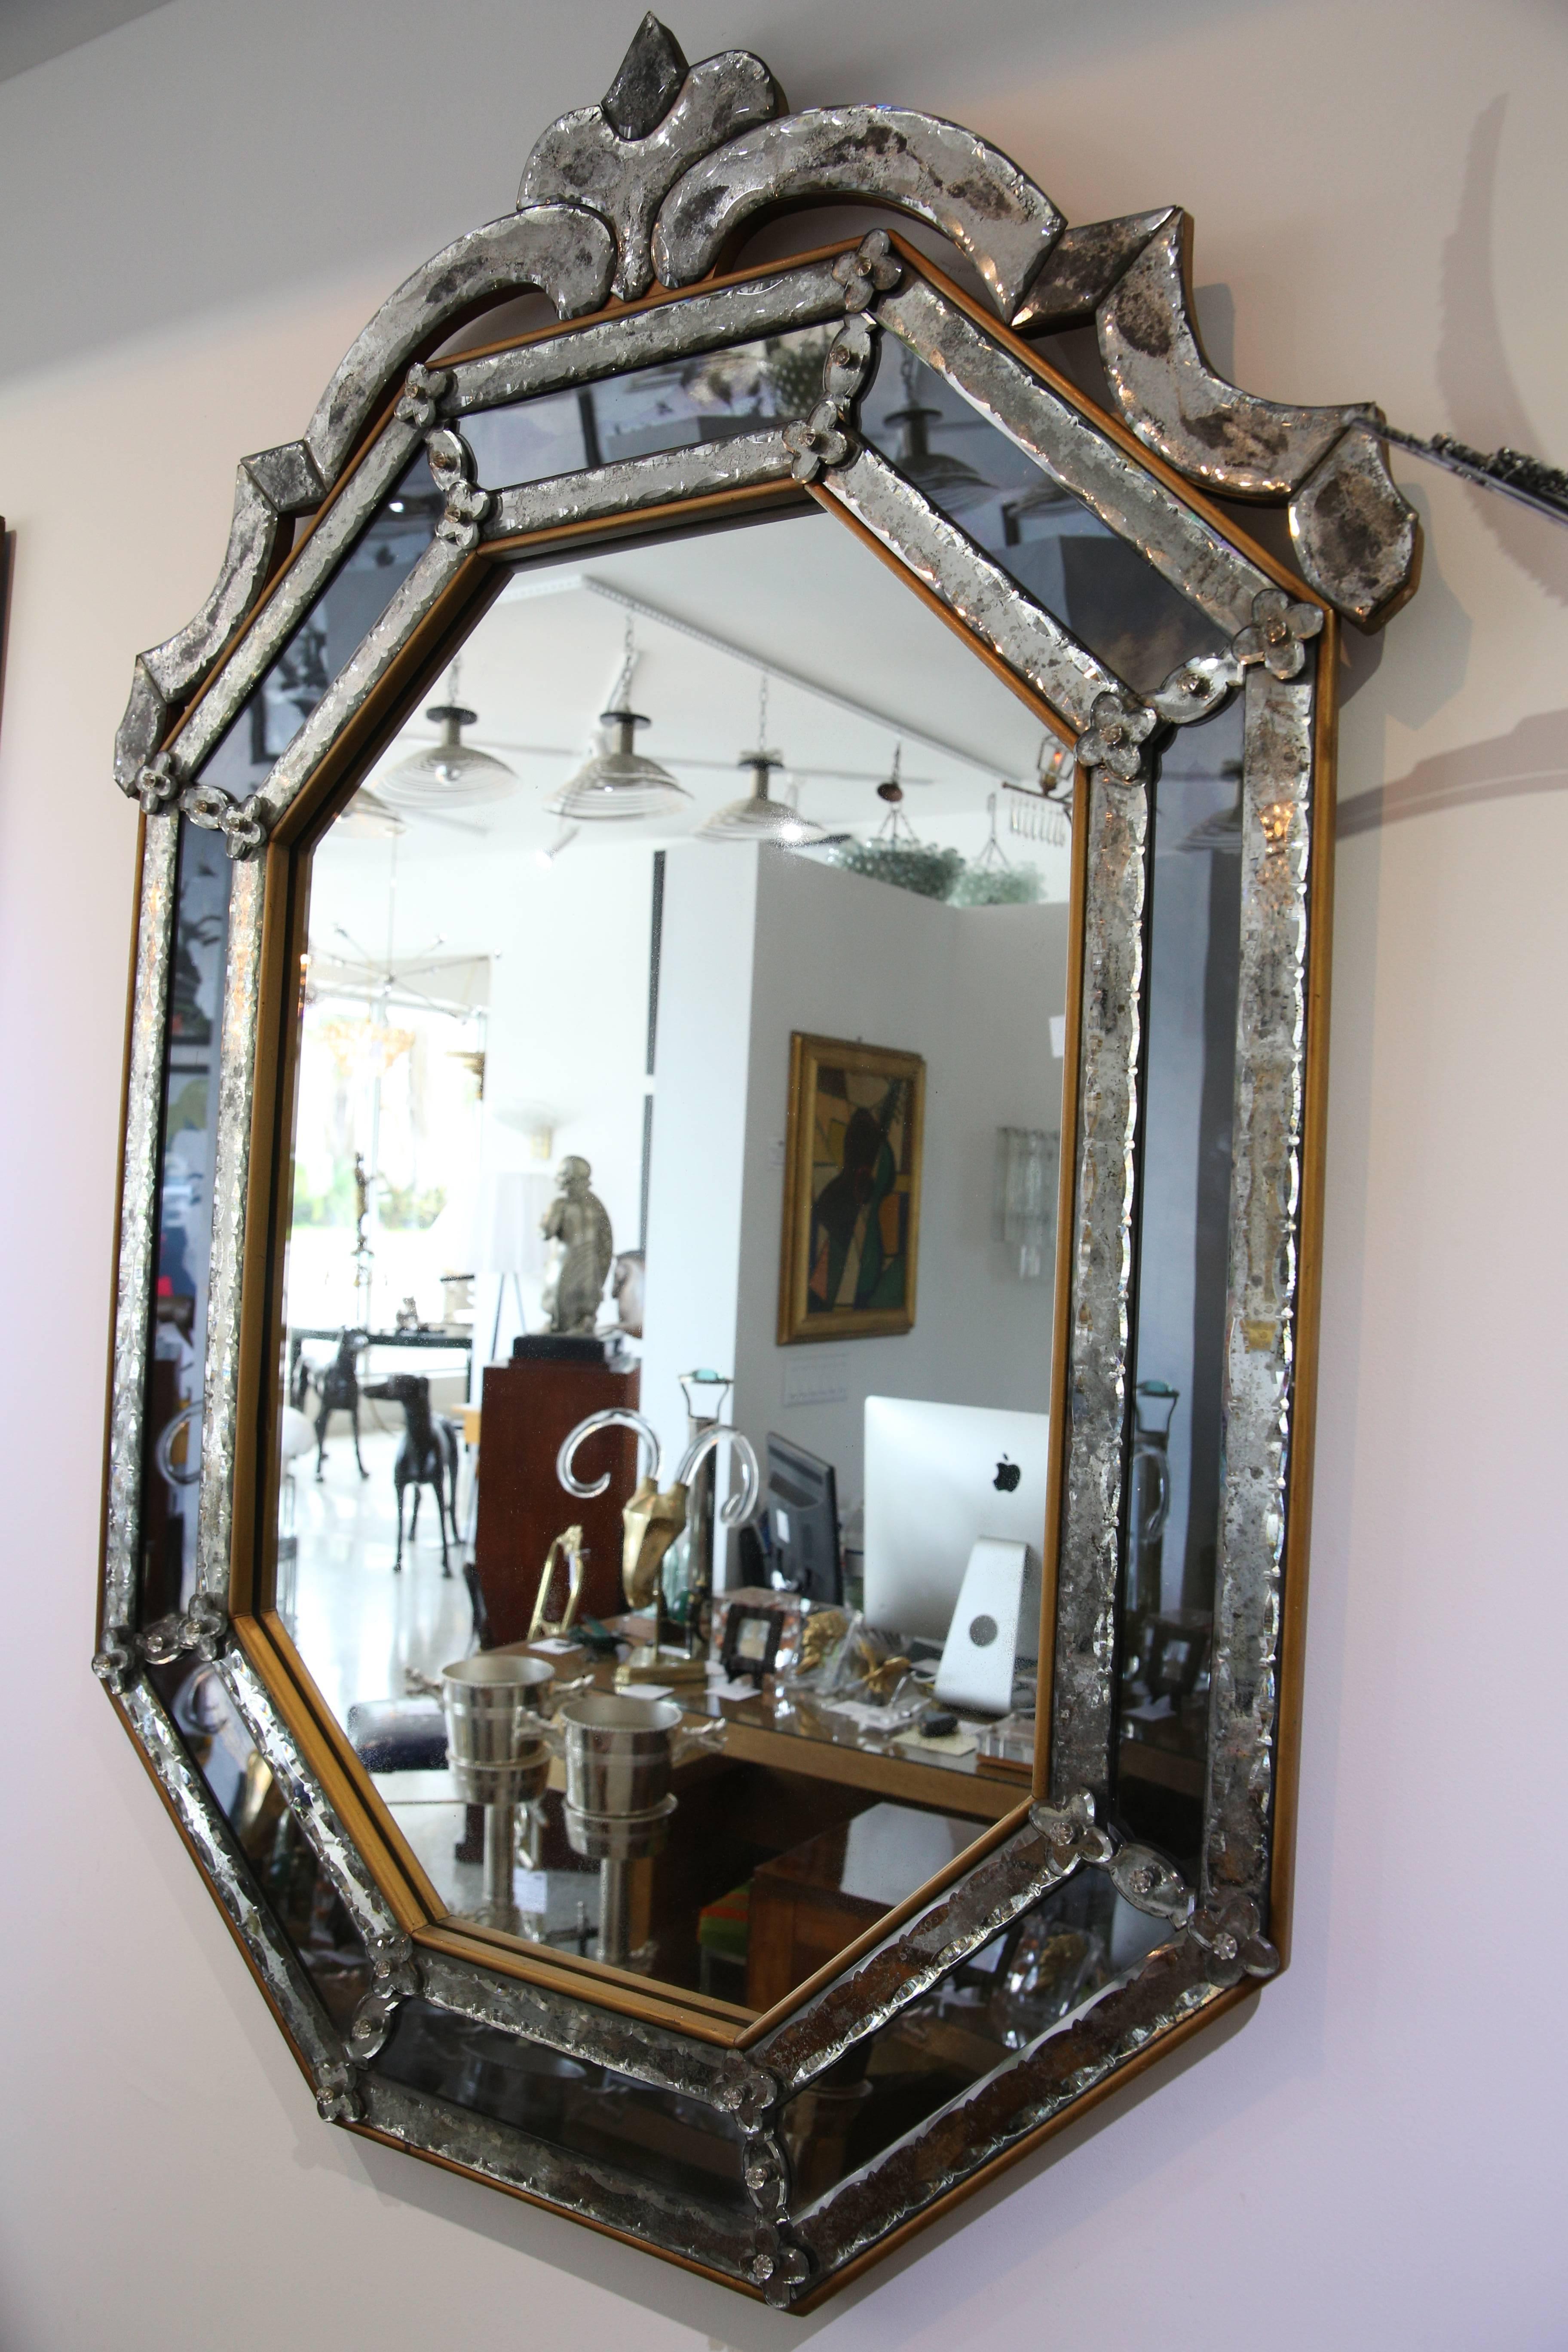 This stylish Venetian Murano glass mirror dates to the 1950s-1960s and is fabricated with antiqued, clear and smoked mirror. The wood frame has an antique gold coloration which frames the panels for a subtle contrast.